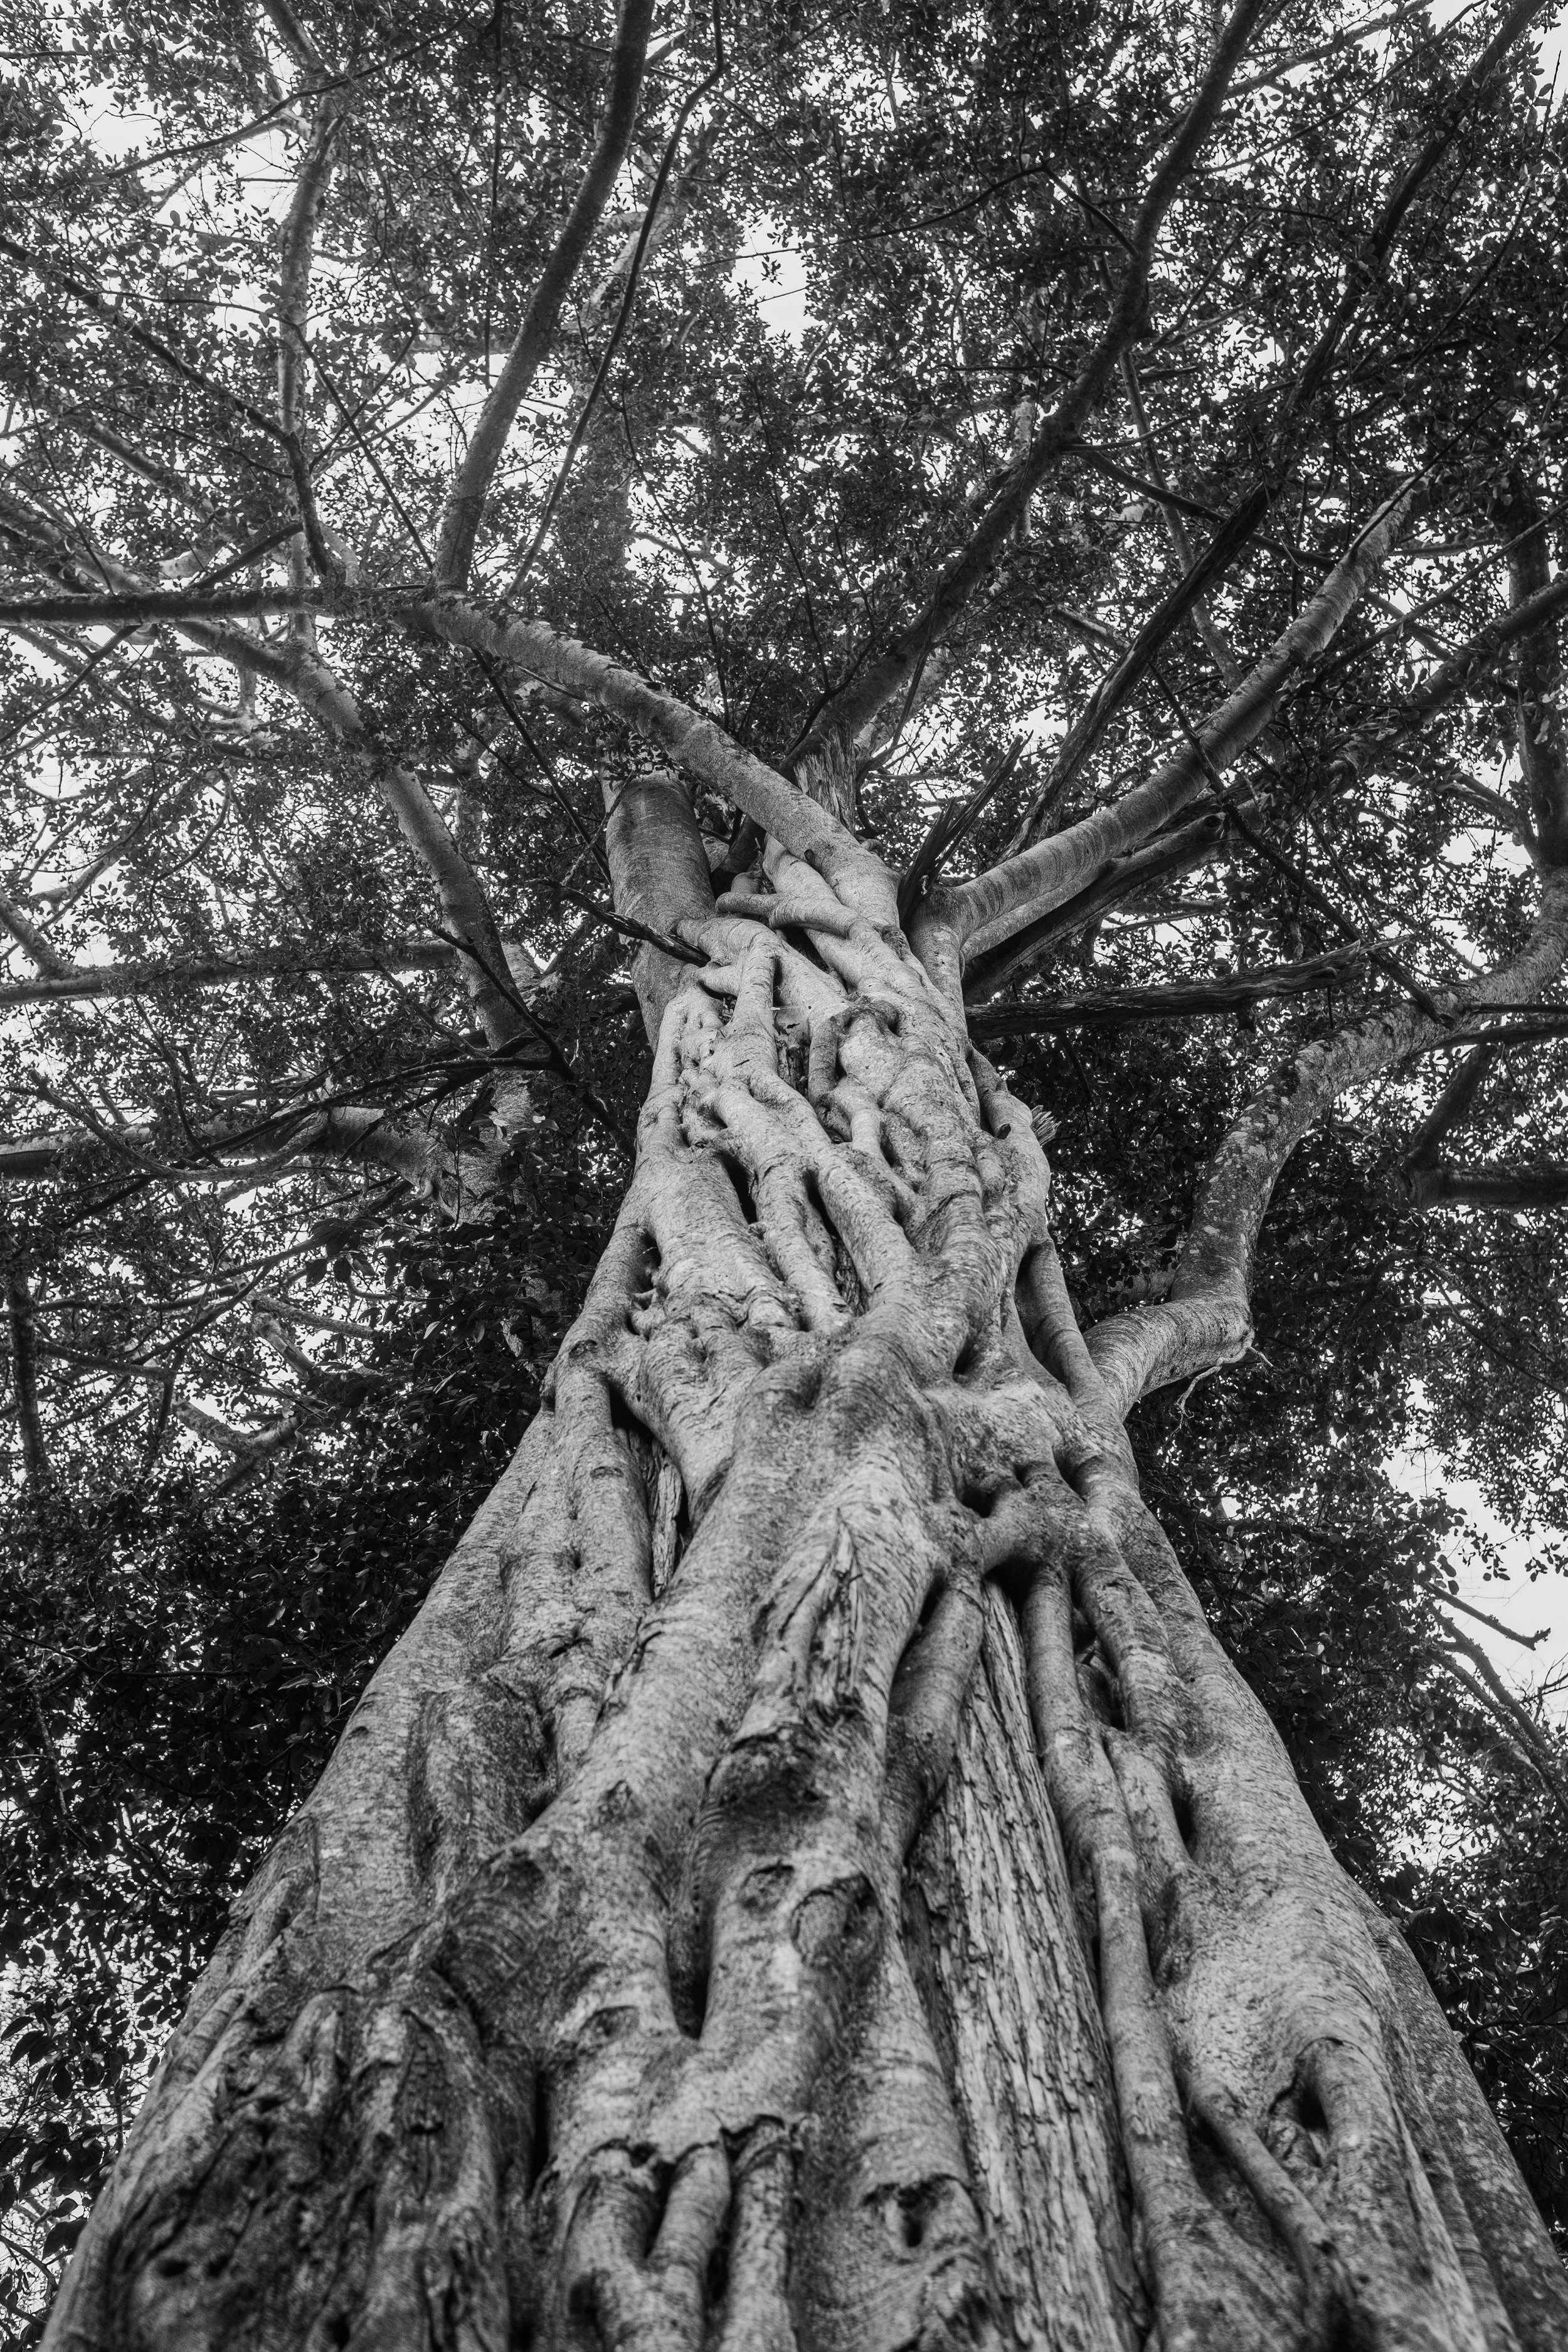  A tree, known as Orititi in Maa langauge, is considered a blessed tree for the Maasai. There are fewer than 10 such trees left in Mukugodo forest. Traditionally, the tribe would gather around this tree, pray and slaughter goats to seek blessings. La